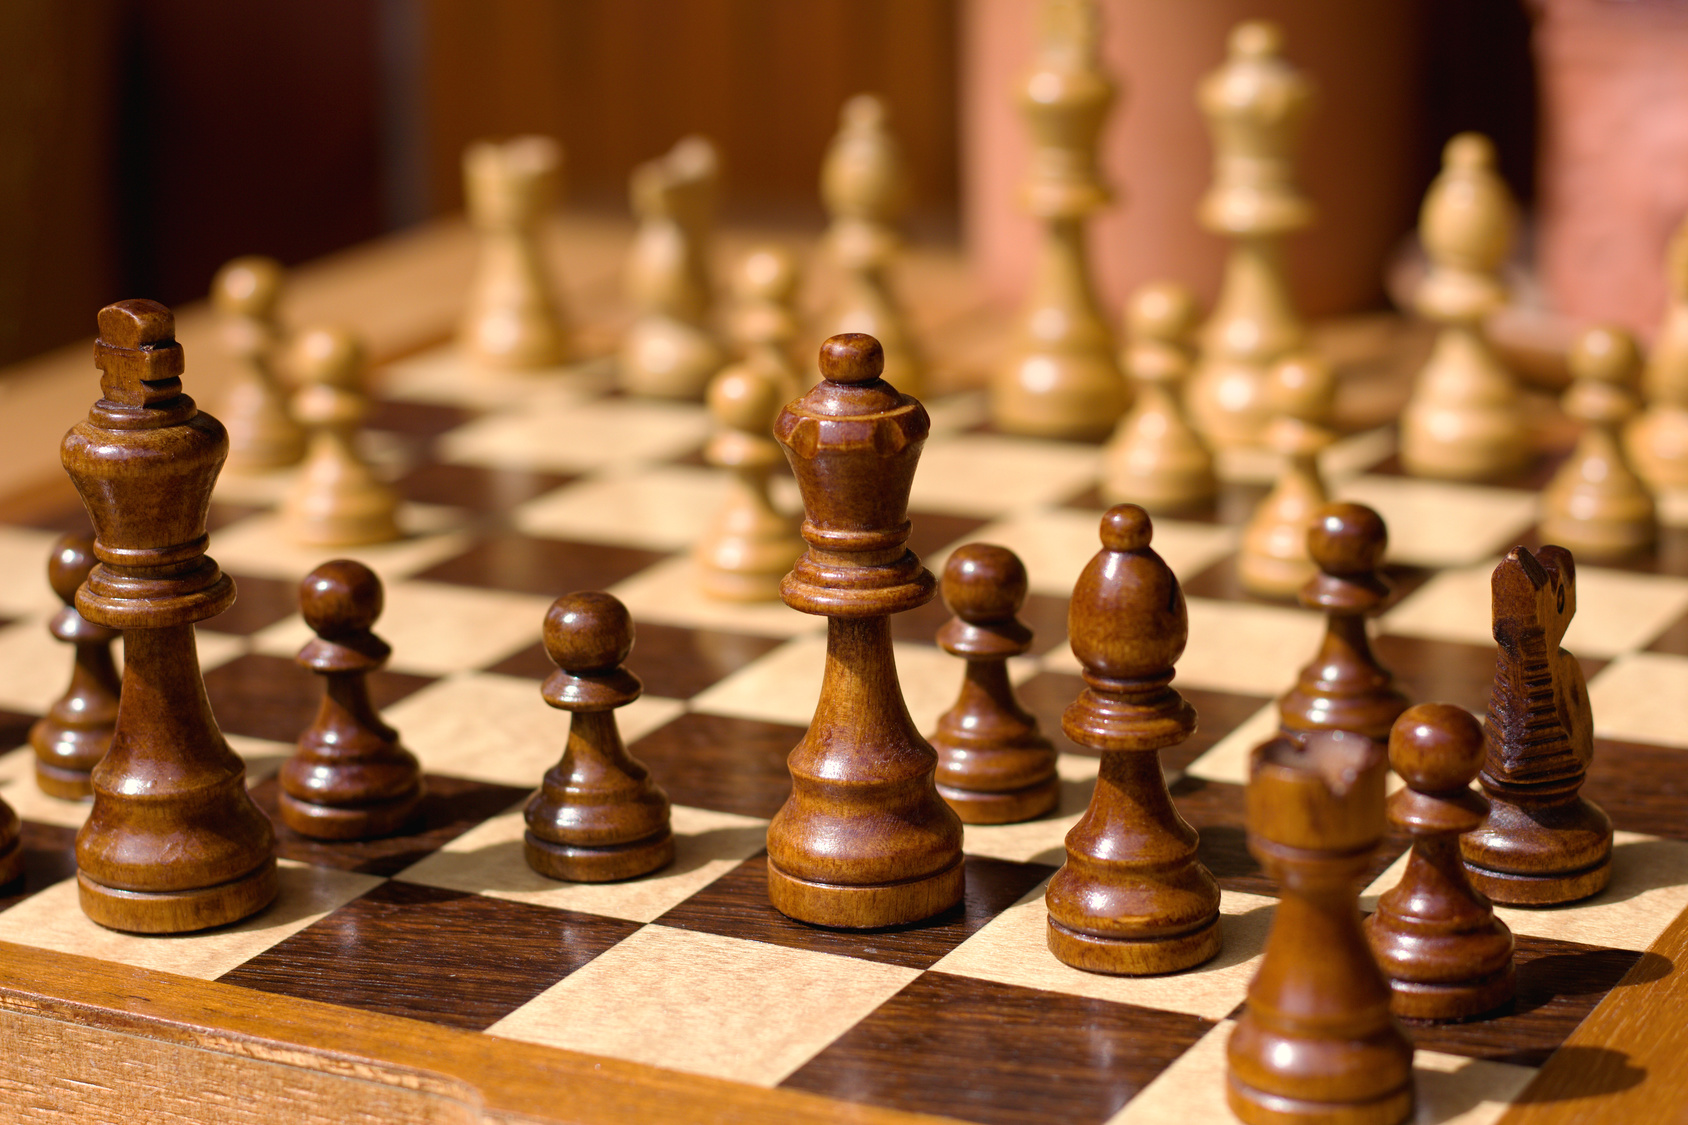 Kazakhstan Chess Federation: playing chess results in better brain